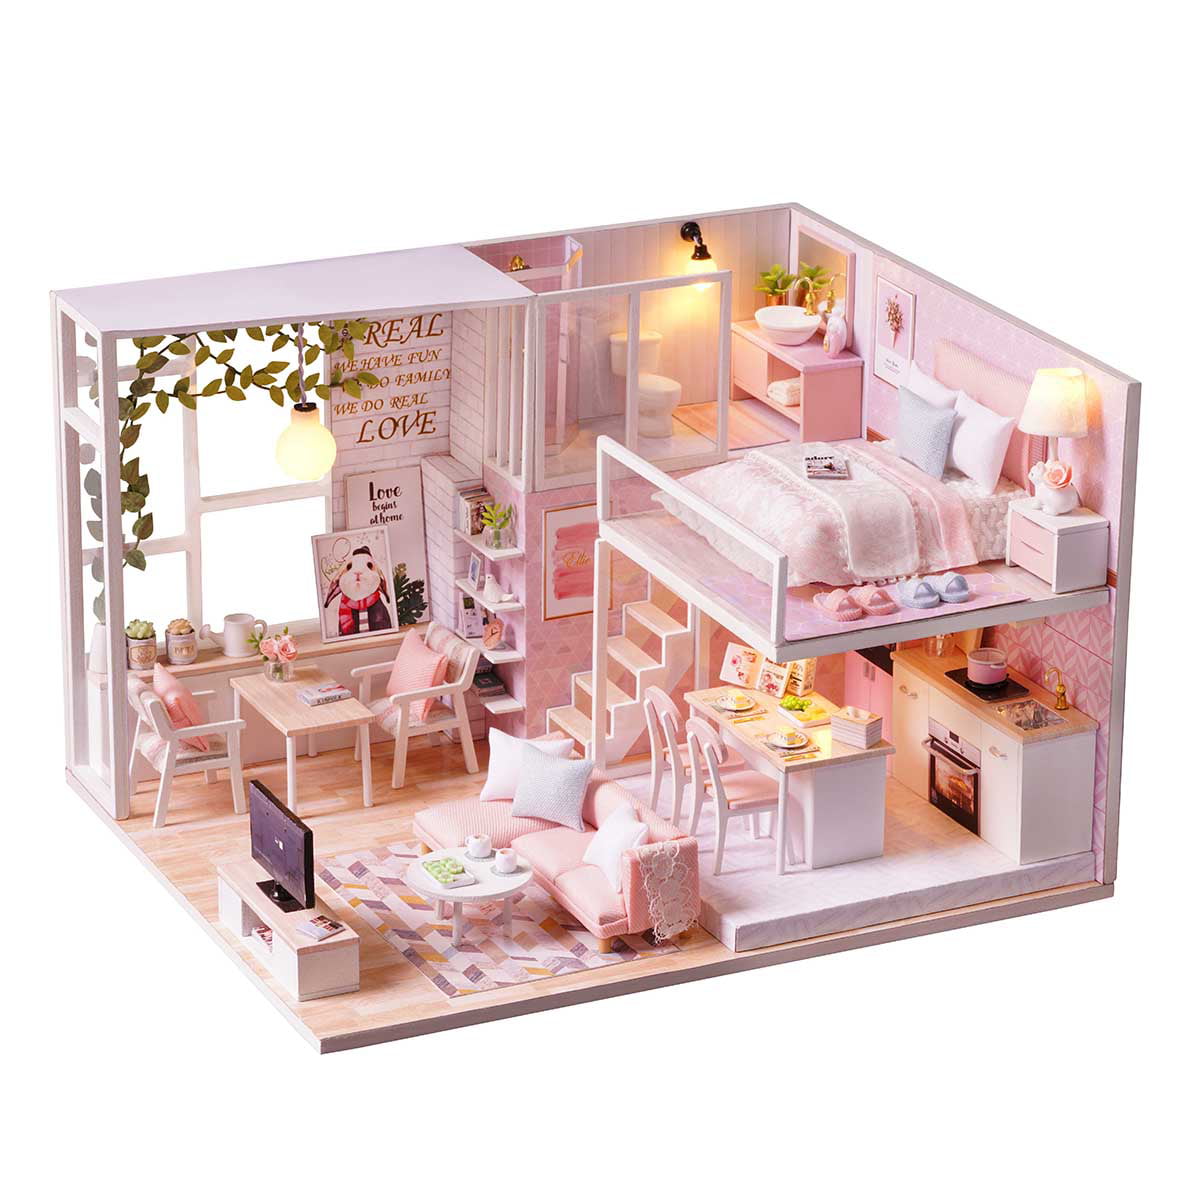 DIY Dollhouse Wooden Doll Houses Miniature Kit Funny games Best 